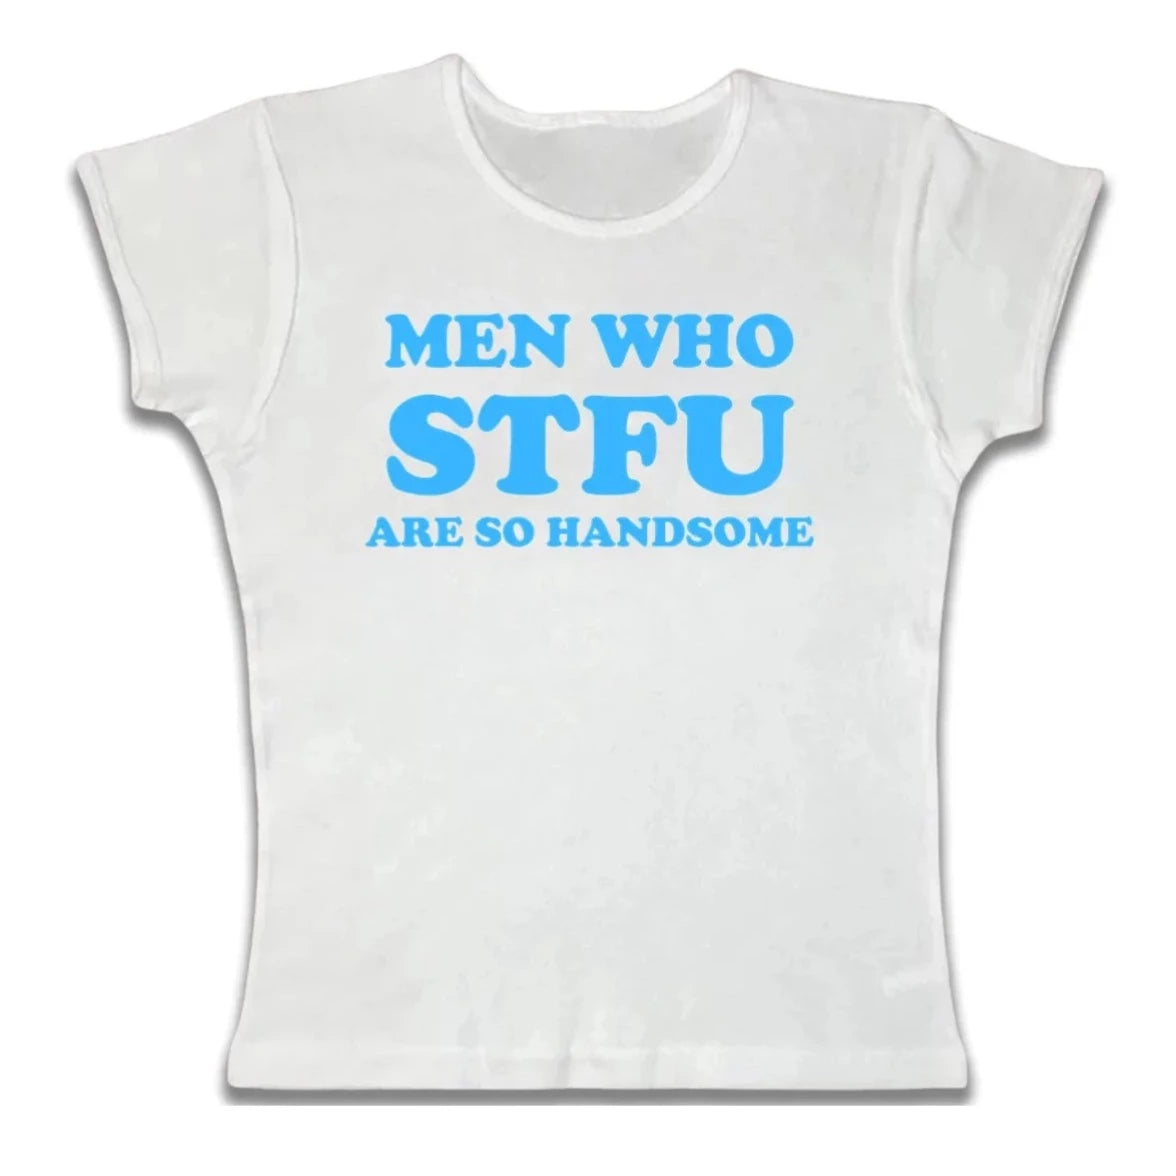 Men Who STFU Are So Handsome Tee